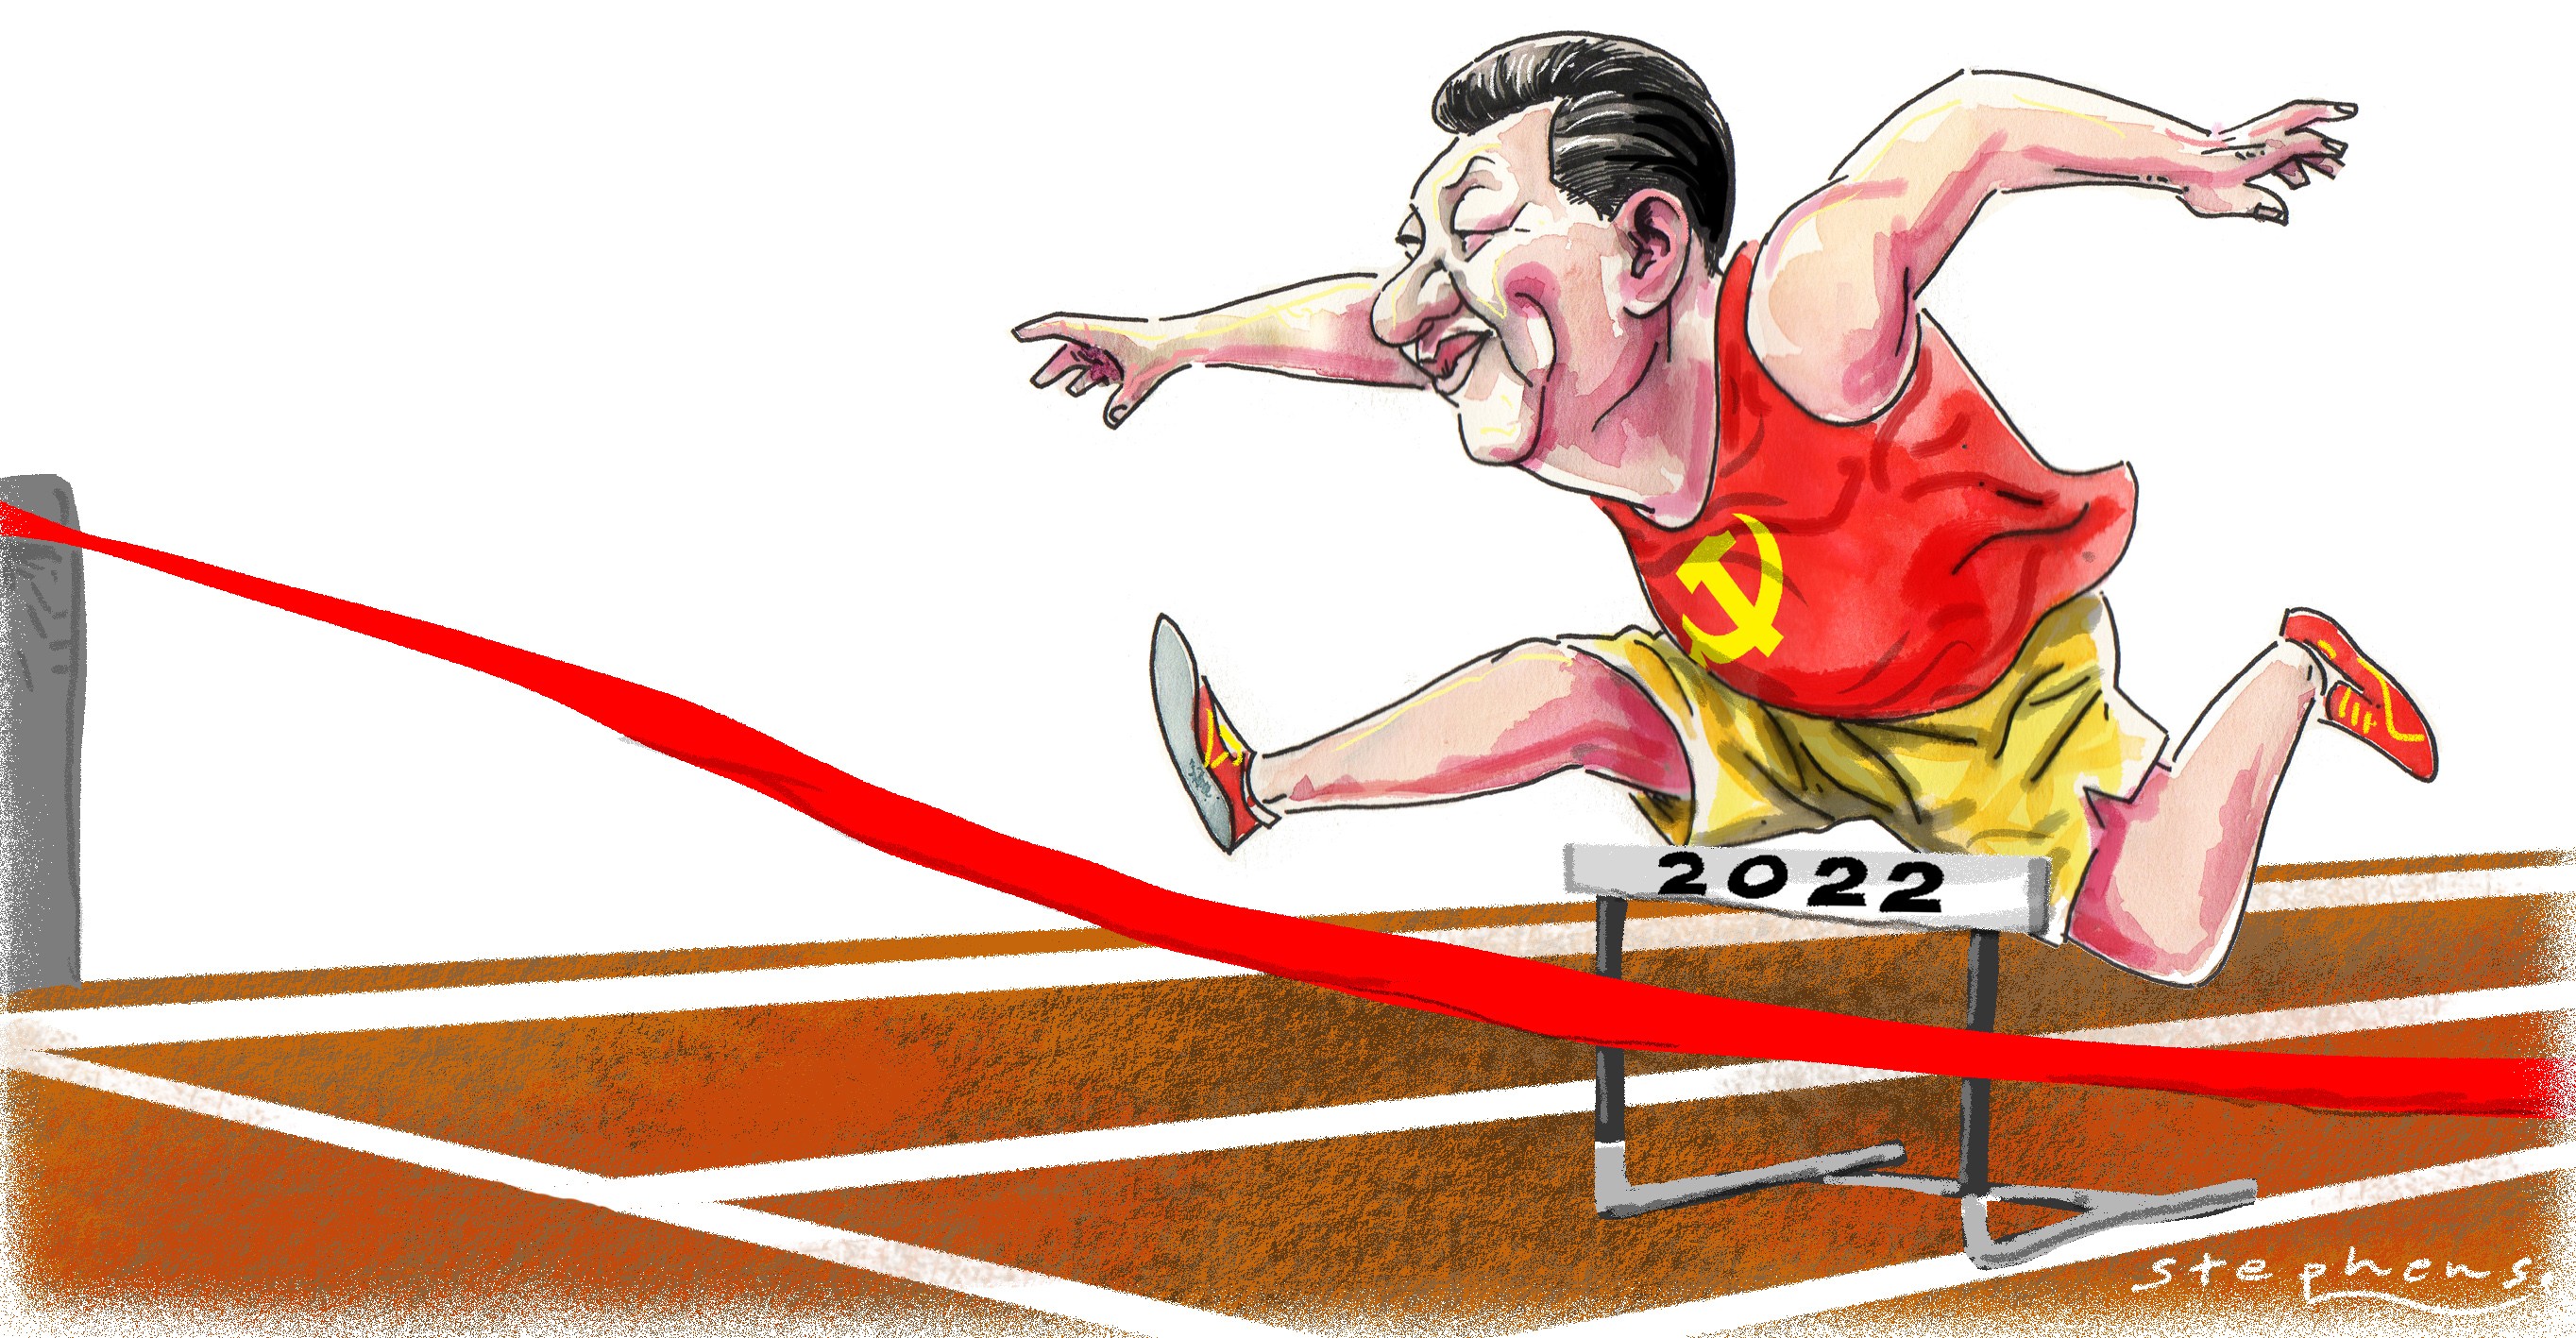 For Xi Jinping to retain authority and power beyond the end of his current term, he needs to be re-elected at the 20th National People’s Congress, expected to be held in late 2022, when he will be 69, just over the unwritten limit of 68. Illustration: Craig Stephens